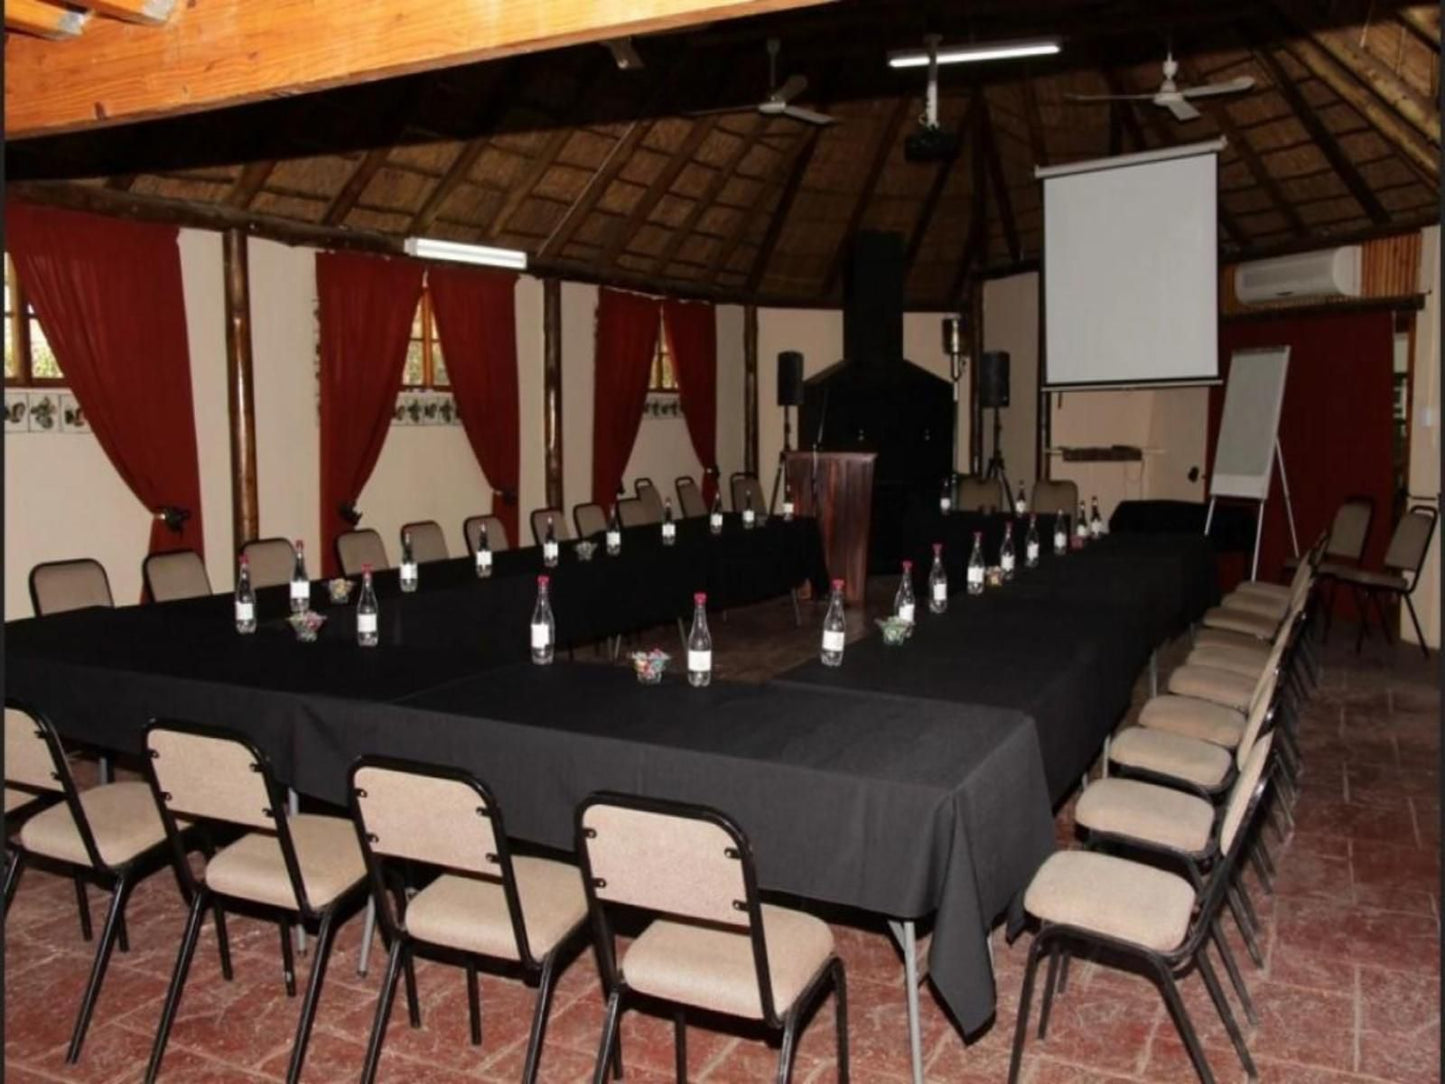 Rusplek Guesthouse Conference Centre And Spa Universitas Bloemfontein Free State South Africa Seminar Room